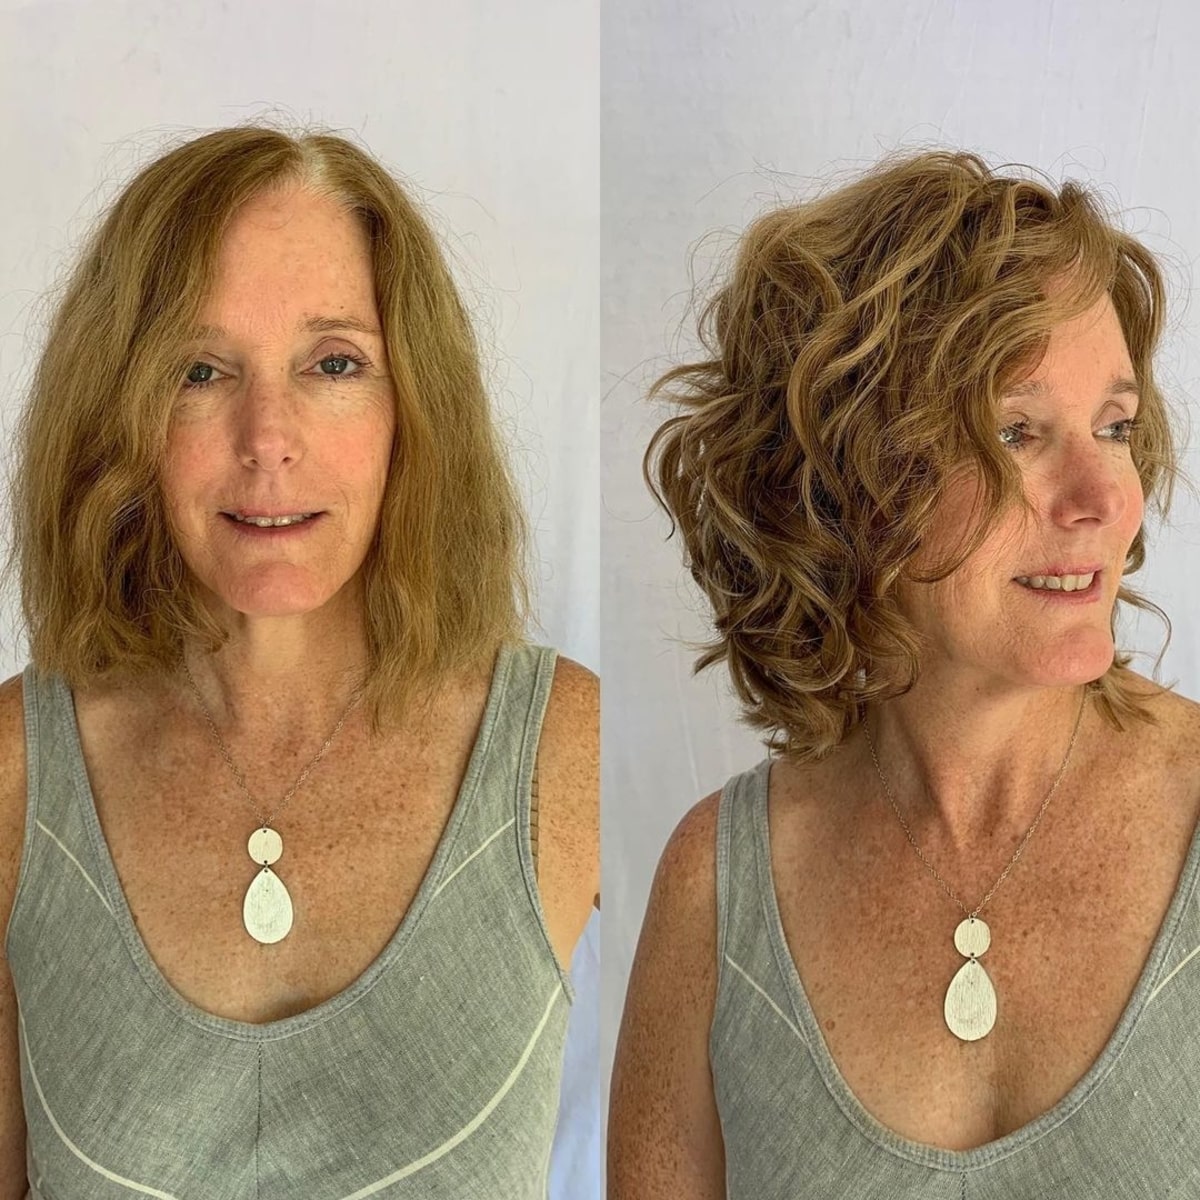 Curly blonde hair for older women